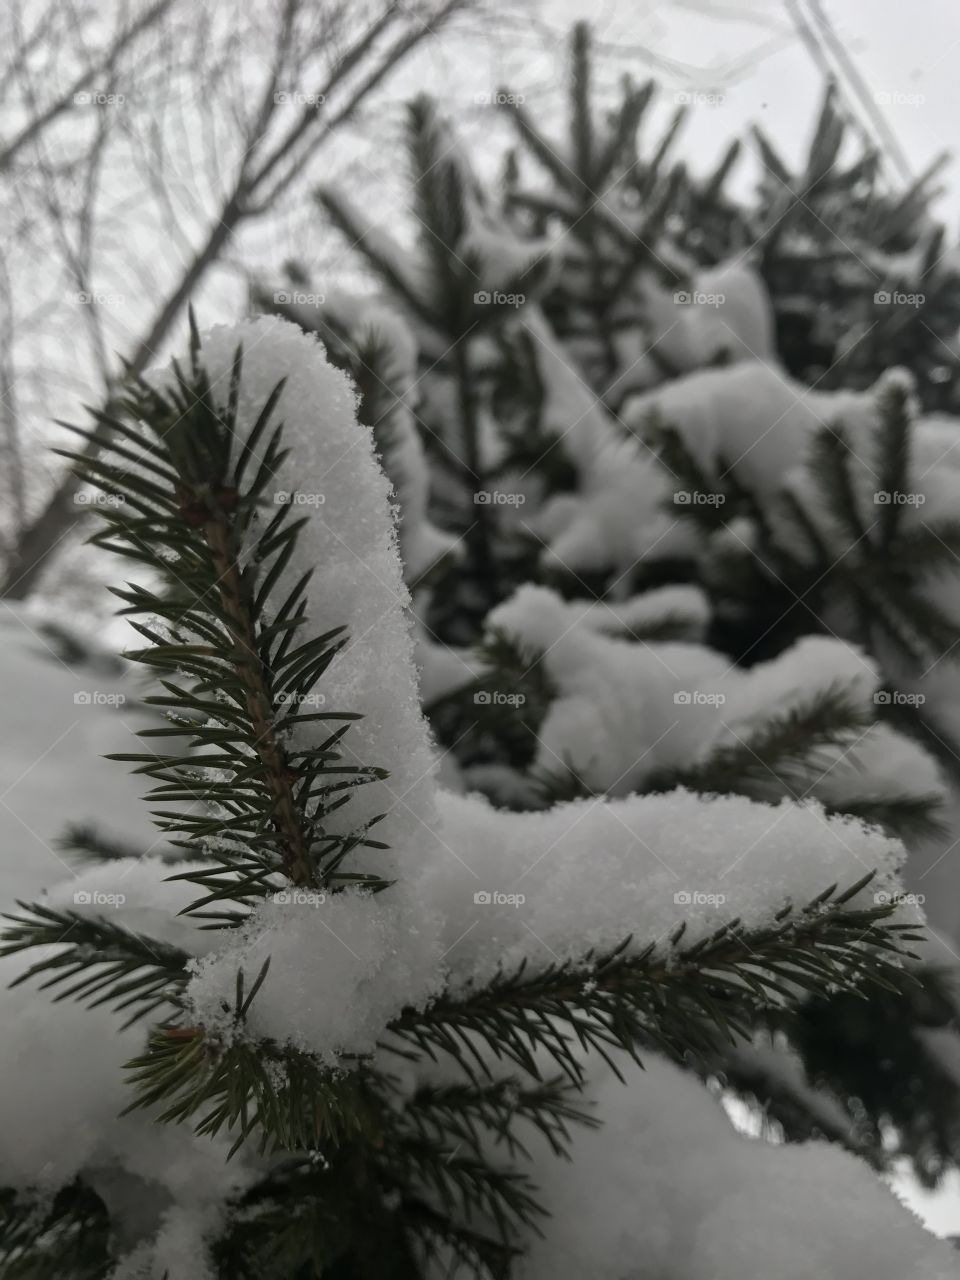 Snow on the branches. Christmas tree needles.